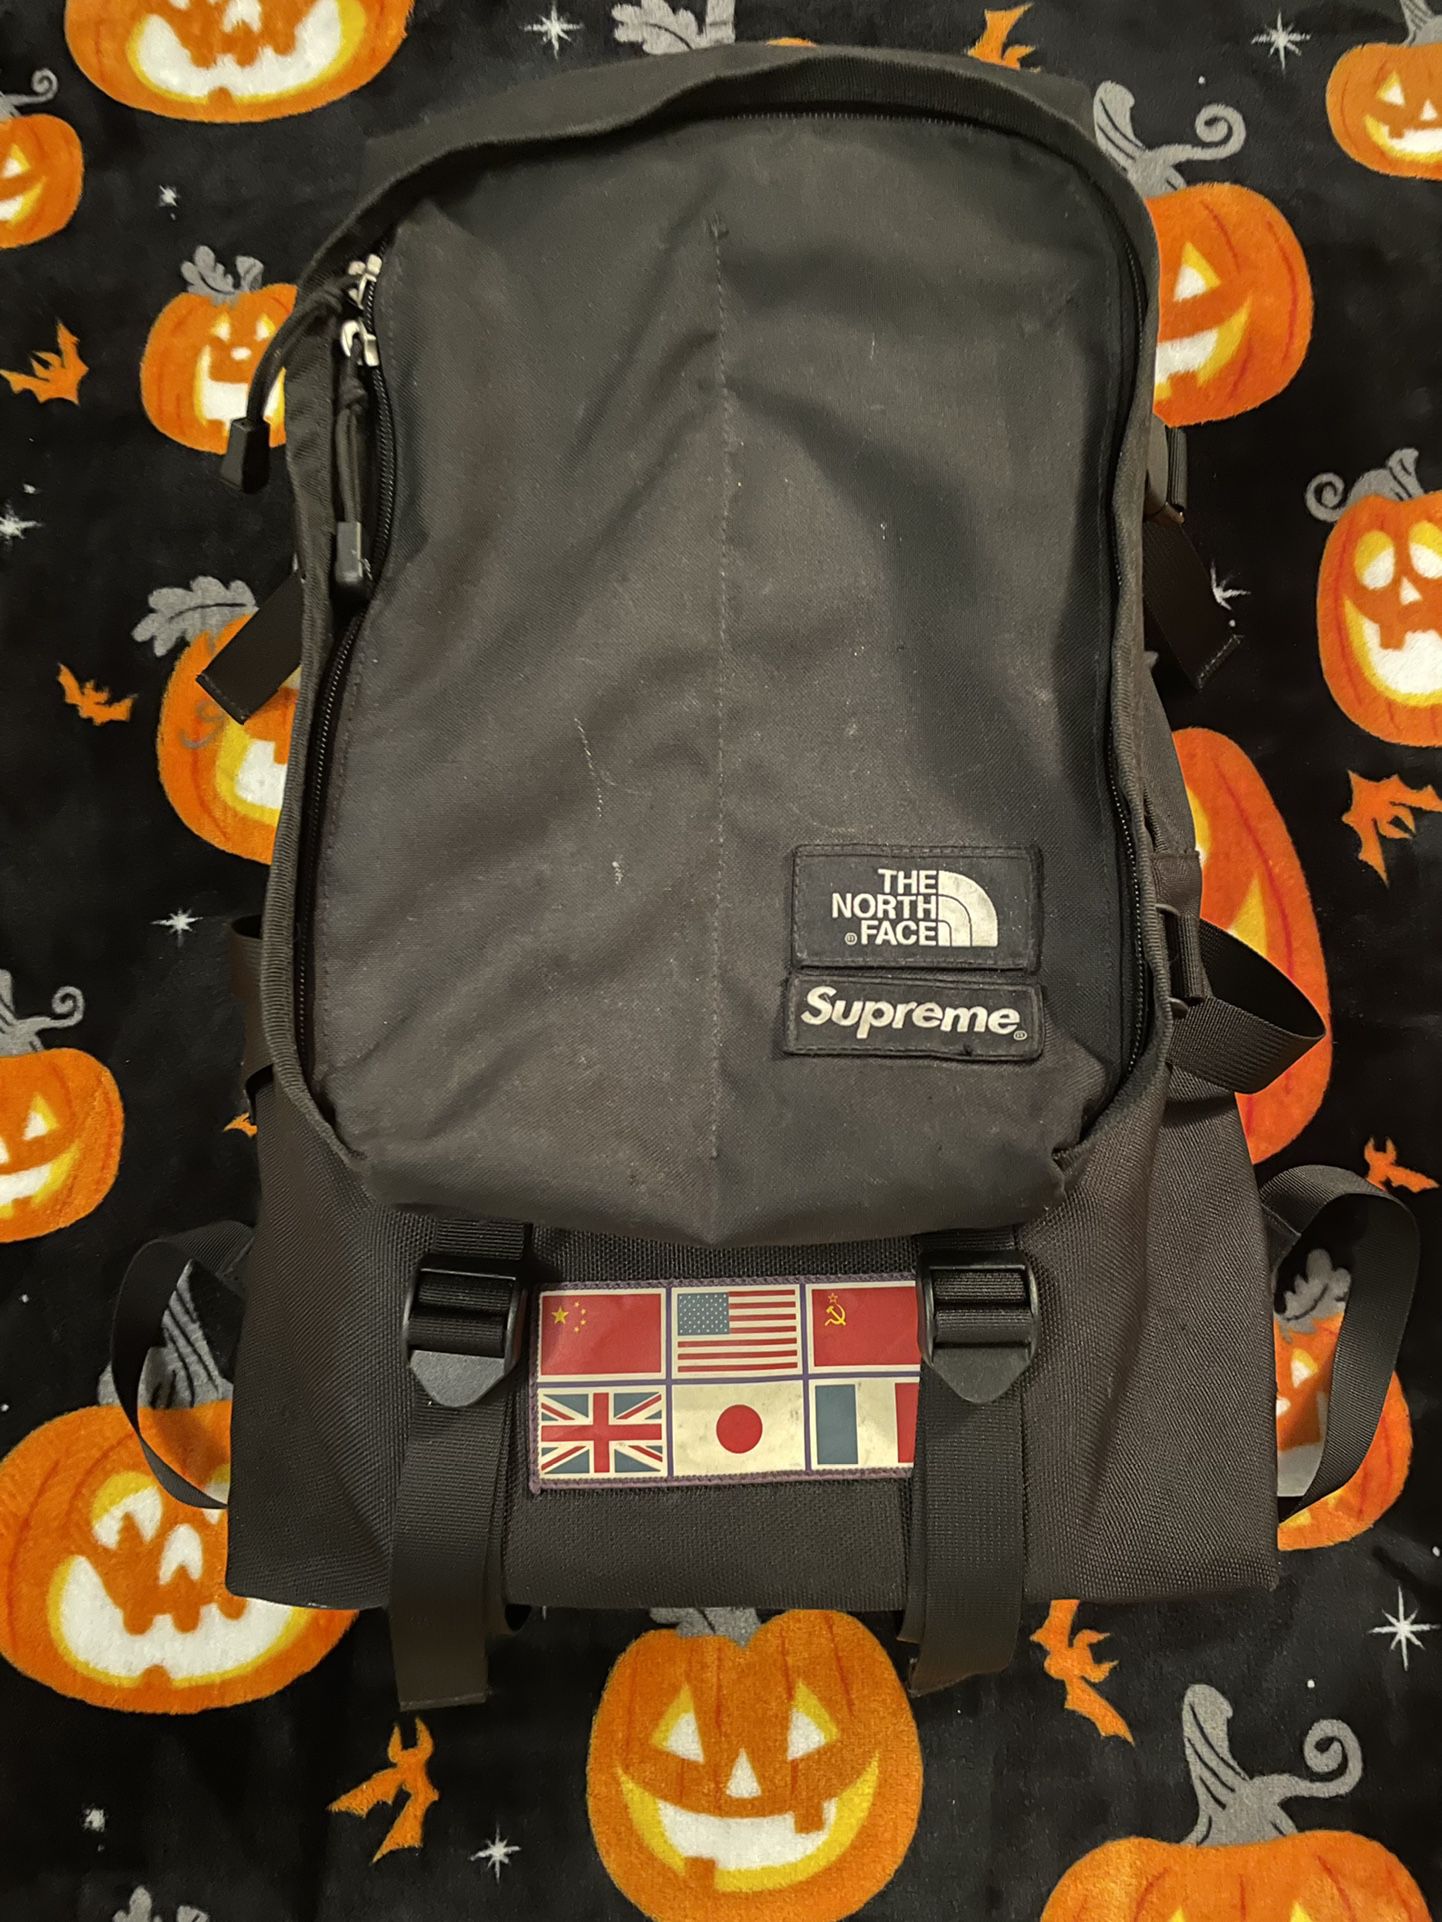 Supreme x The Northface Backpack 